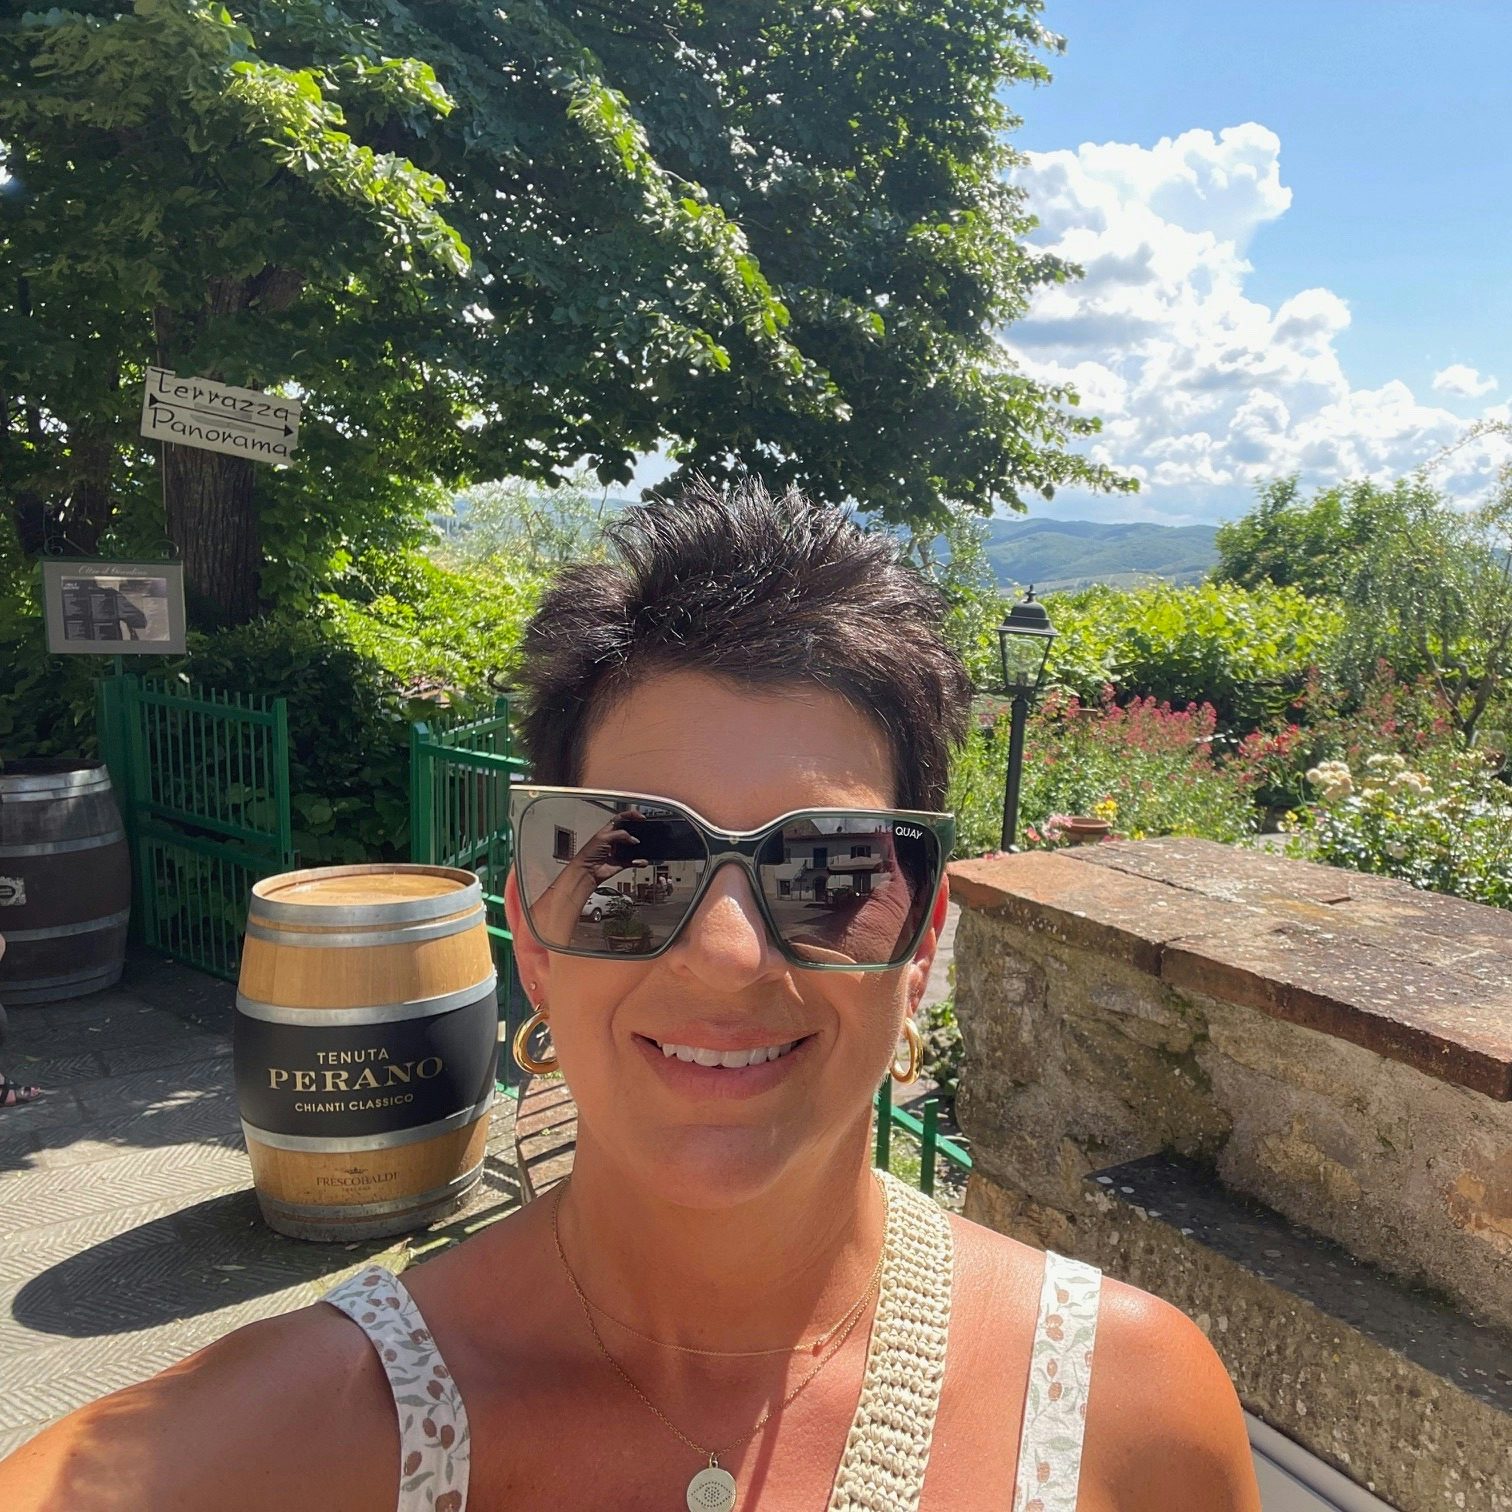 A selfie of Barbara Fodor in a white tank top at a vineyard in front of a barrel that says "Tenuta Perano Chianti Classico," a sign that says "Terrazza Panorama" and green hills. 